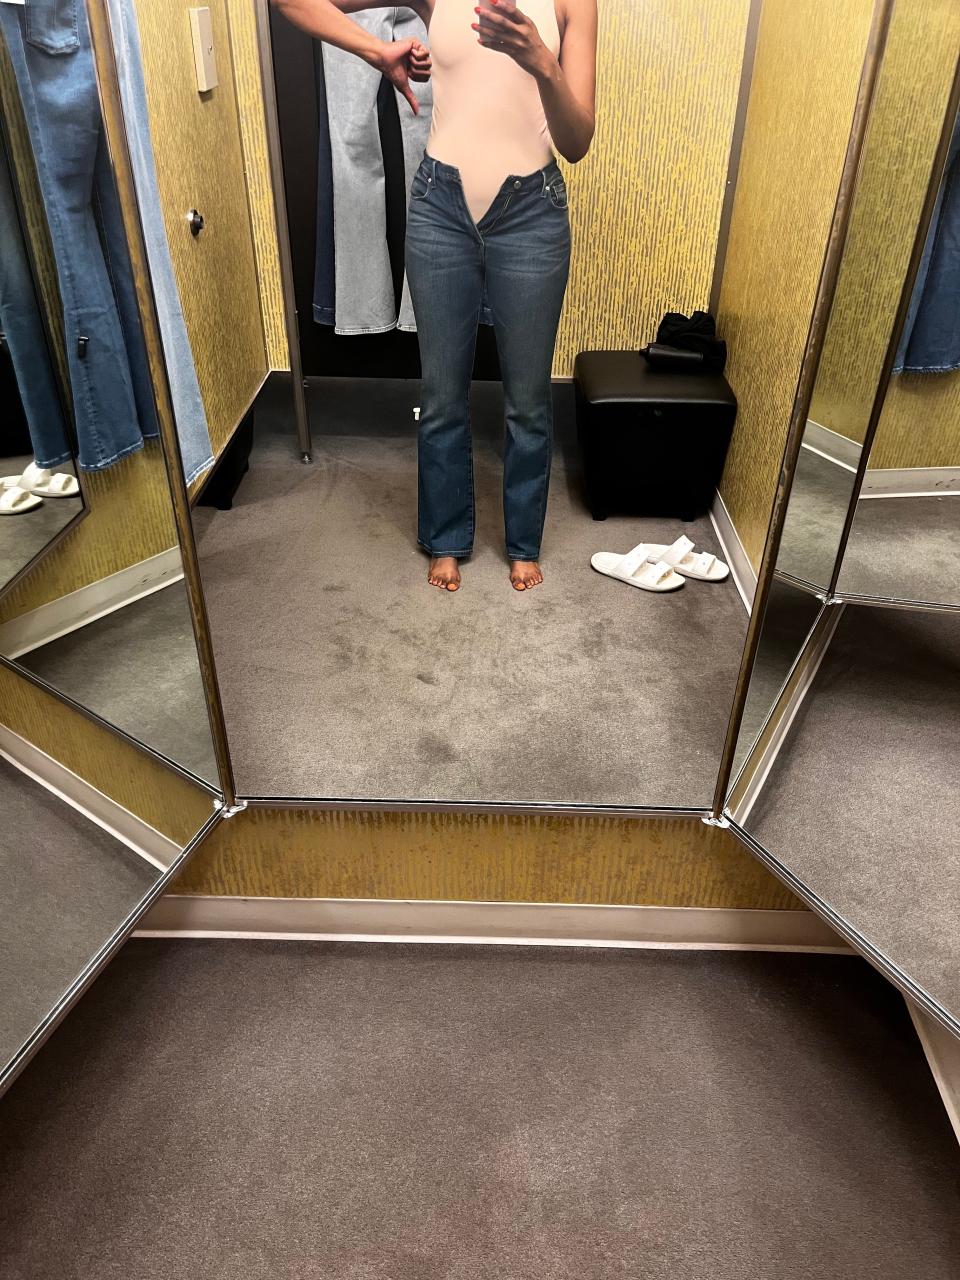 Author Joi-Marie McKenzie trying on jeans in a Nordstrom dressing room.